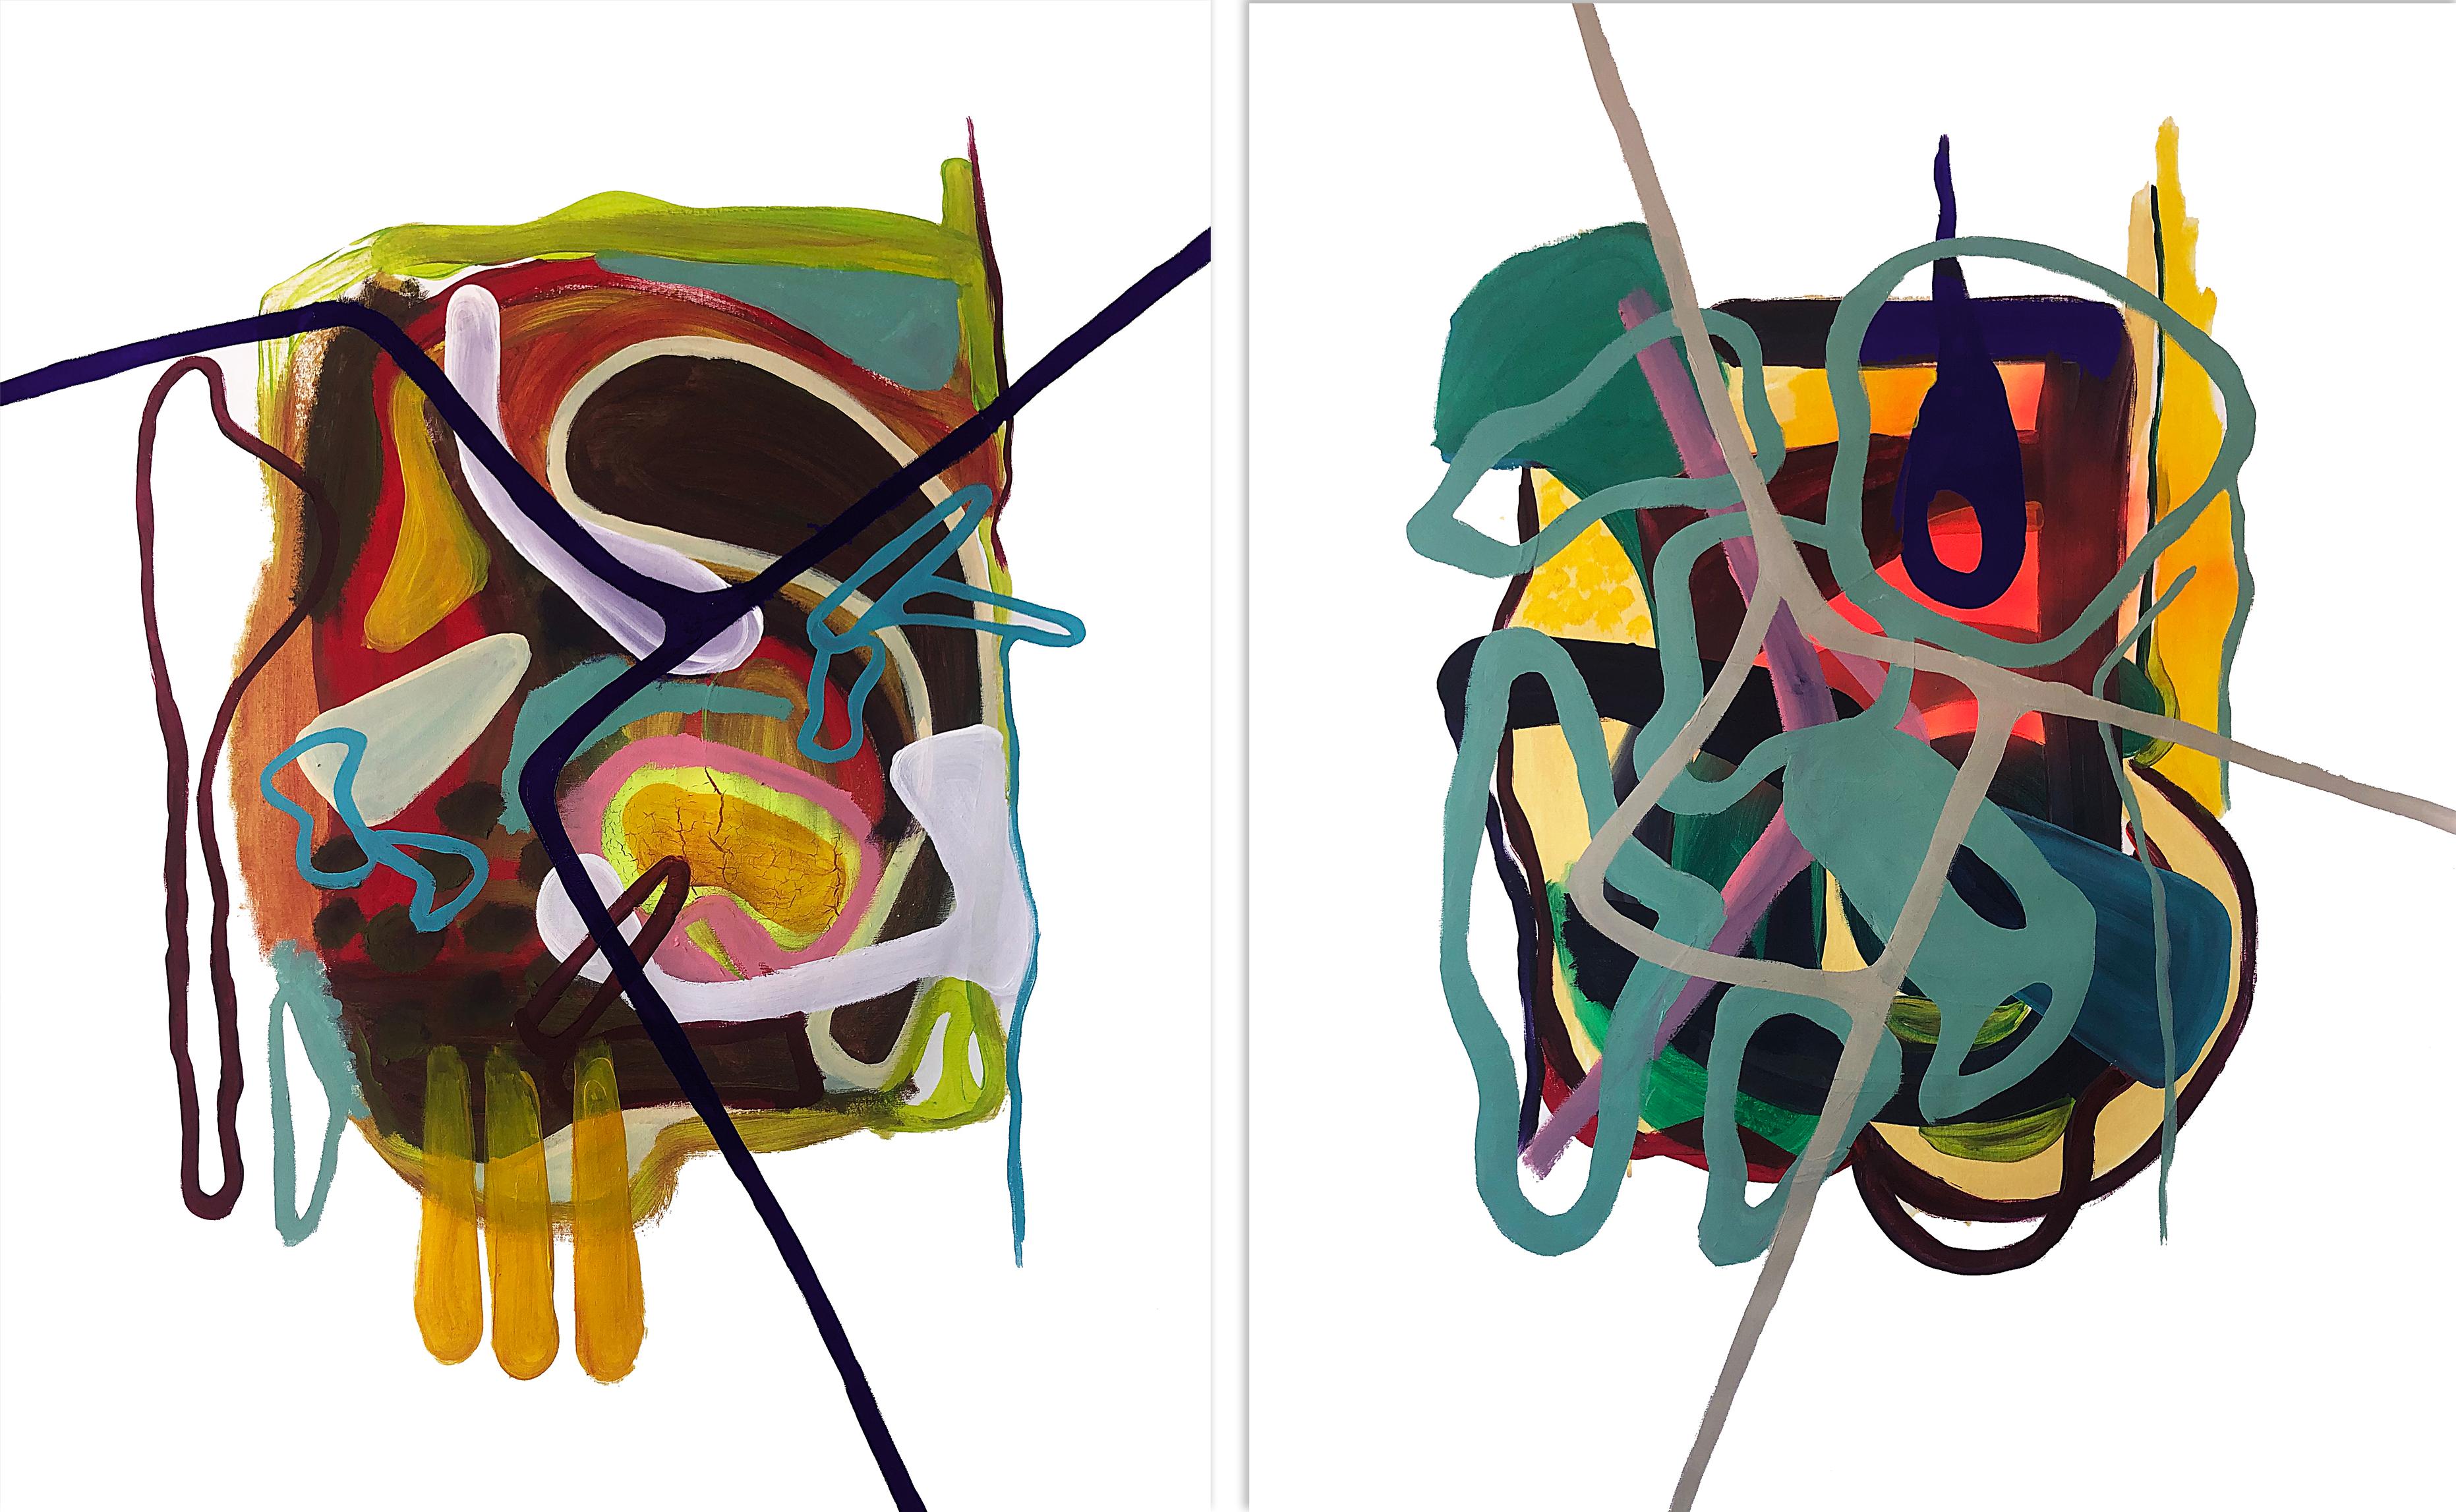 Plastic ADN V and IV, Diptych. Mixed media Abstract painting on a stretcher